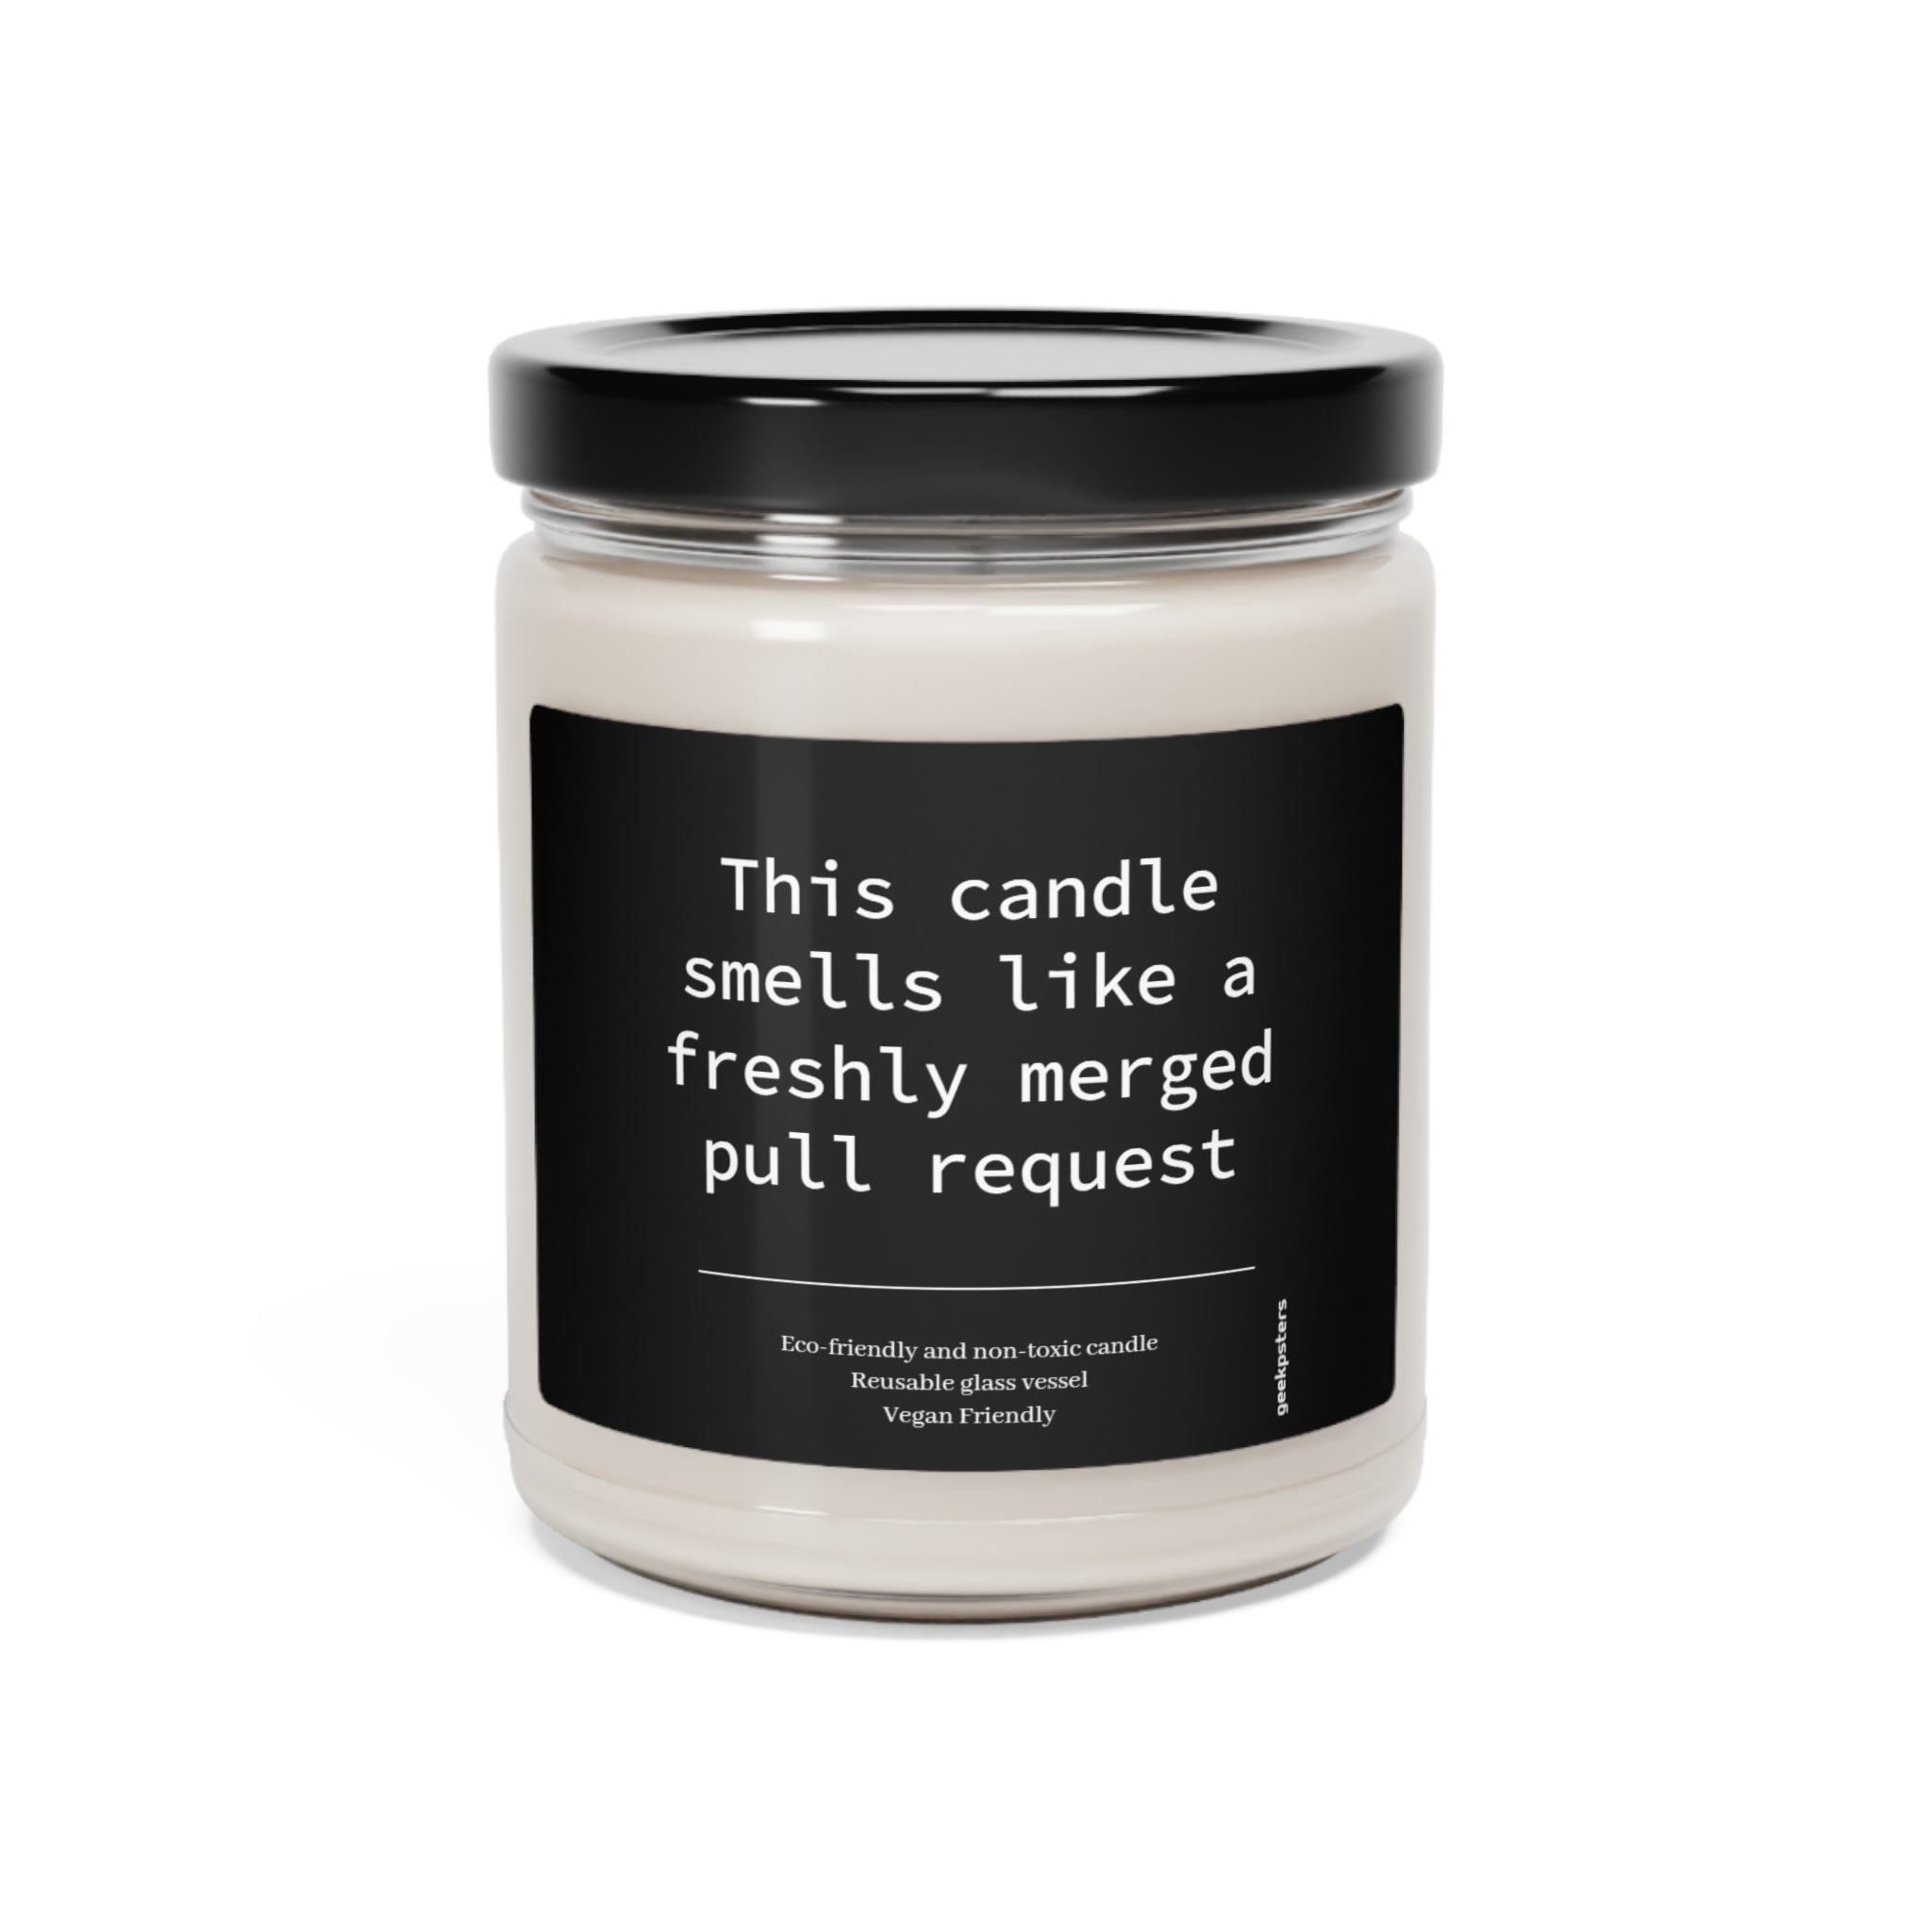 A scented candle with a cotton wick and a humorous label that reads "This Candle Smells Like a Freshly Merged Pull Request - Scented Soy Candle, 9oz.